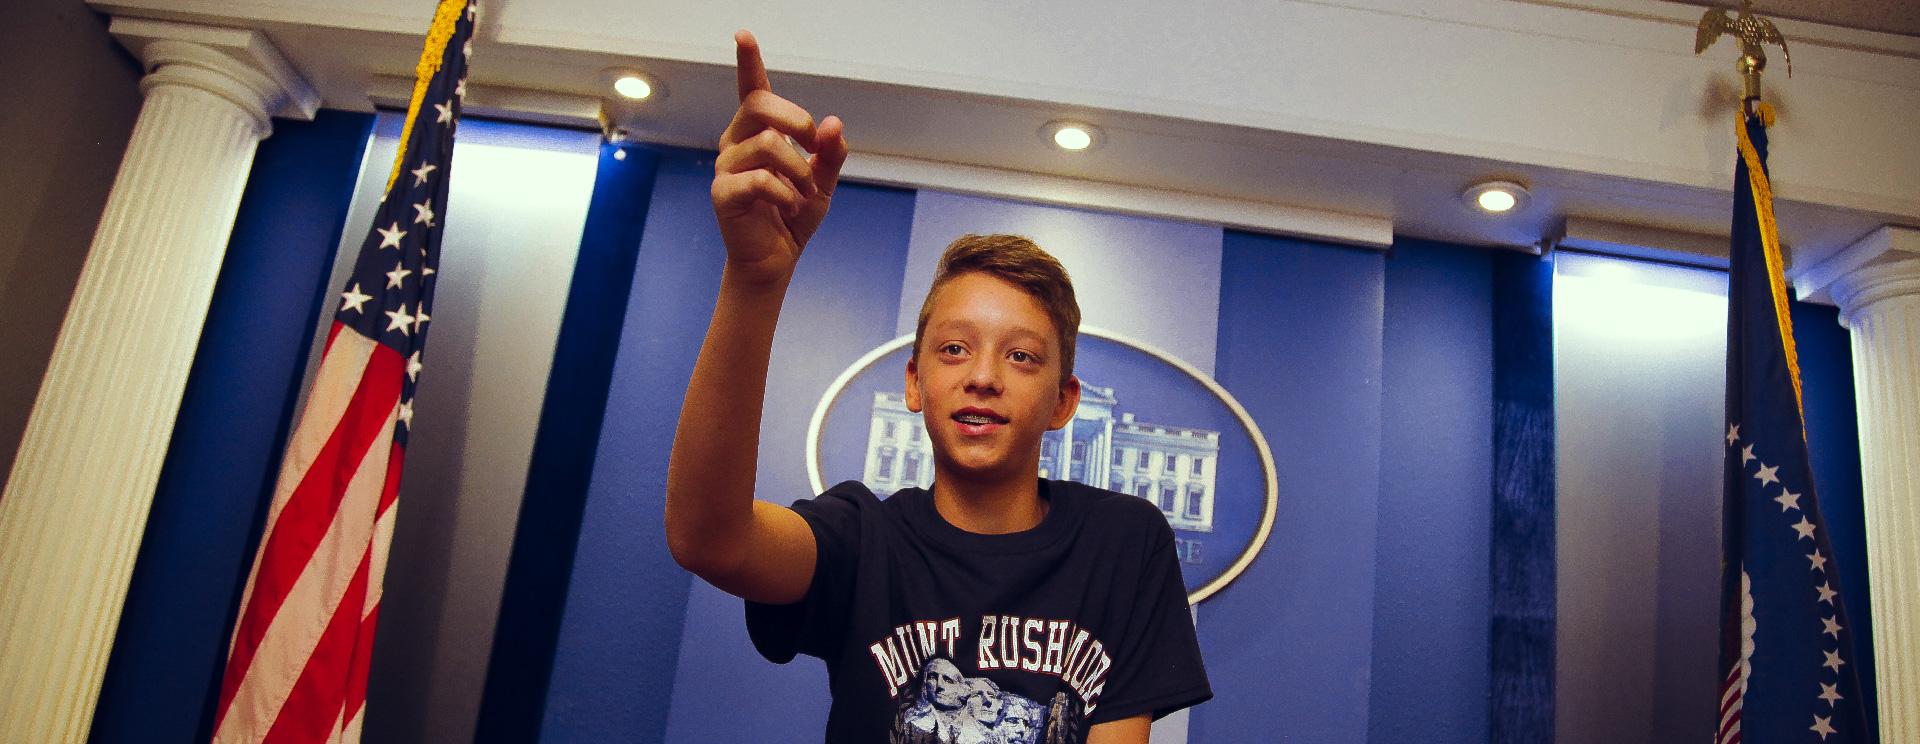 National Presidential Wax Museum